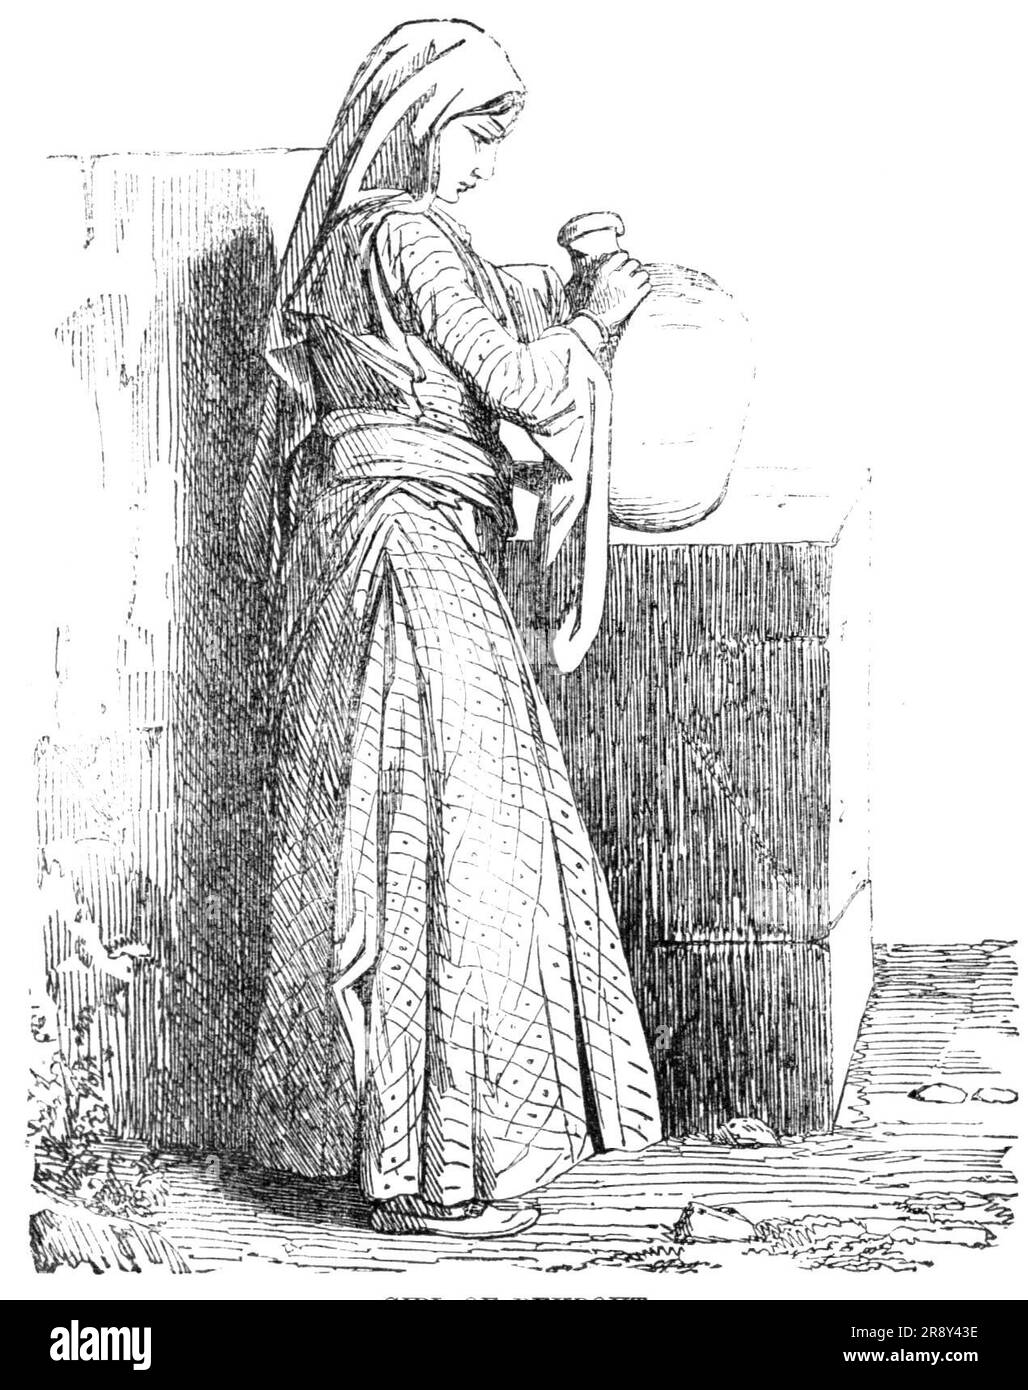 The Desert Route - Girl of Beyrout, 1857. 'The young lady who is reclining against the wall of the fountain, her water-pot resting on a stone against which she herself leans, is the daughter of a shopkeeper at Beyrout...[She] is a fair specimen of the general run of Beyrout beauty; her features and hands are good, and so are her feet, though ensconced in those unseemly yellow shoes trimmed with red bows; she wears stockings, which is a certain indication at Beyrout of being well to do in the world; her dress is a chequered-pattern Damascus silk, and. the shawl round her waist is of Tripoli man Stock Photo